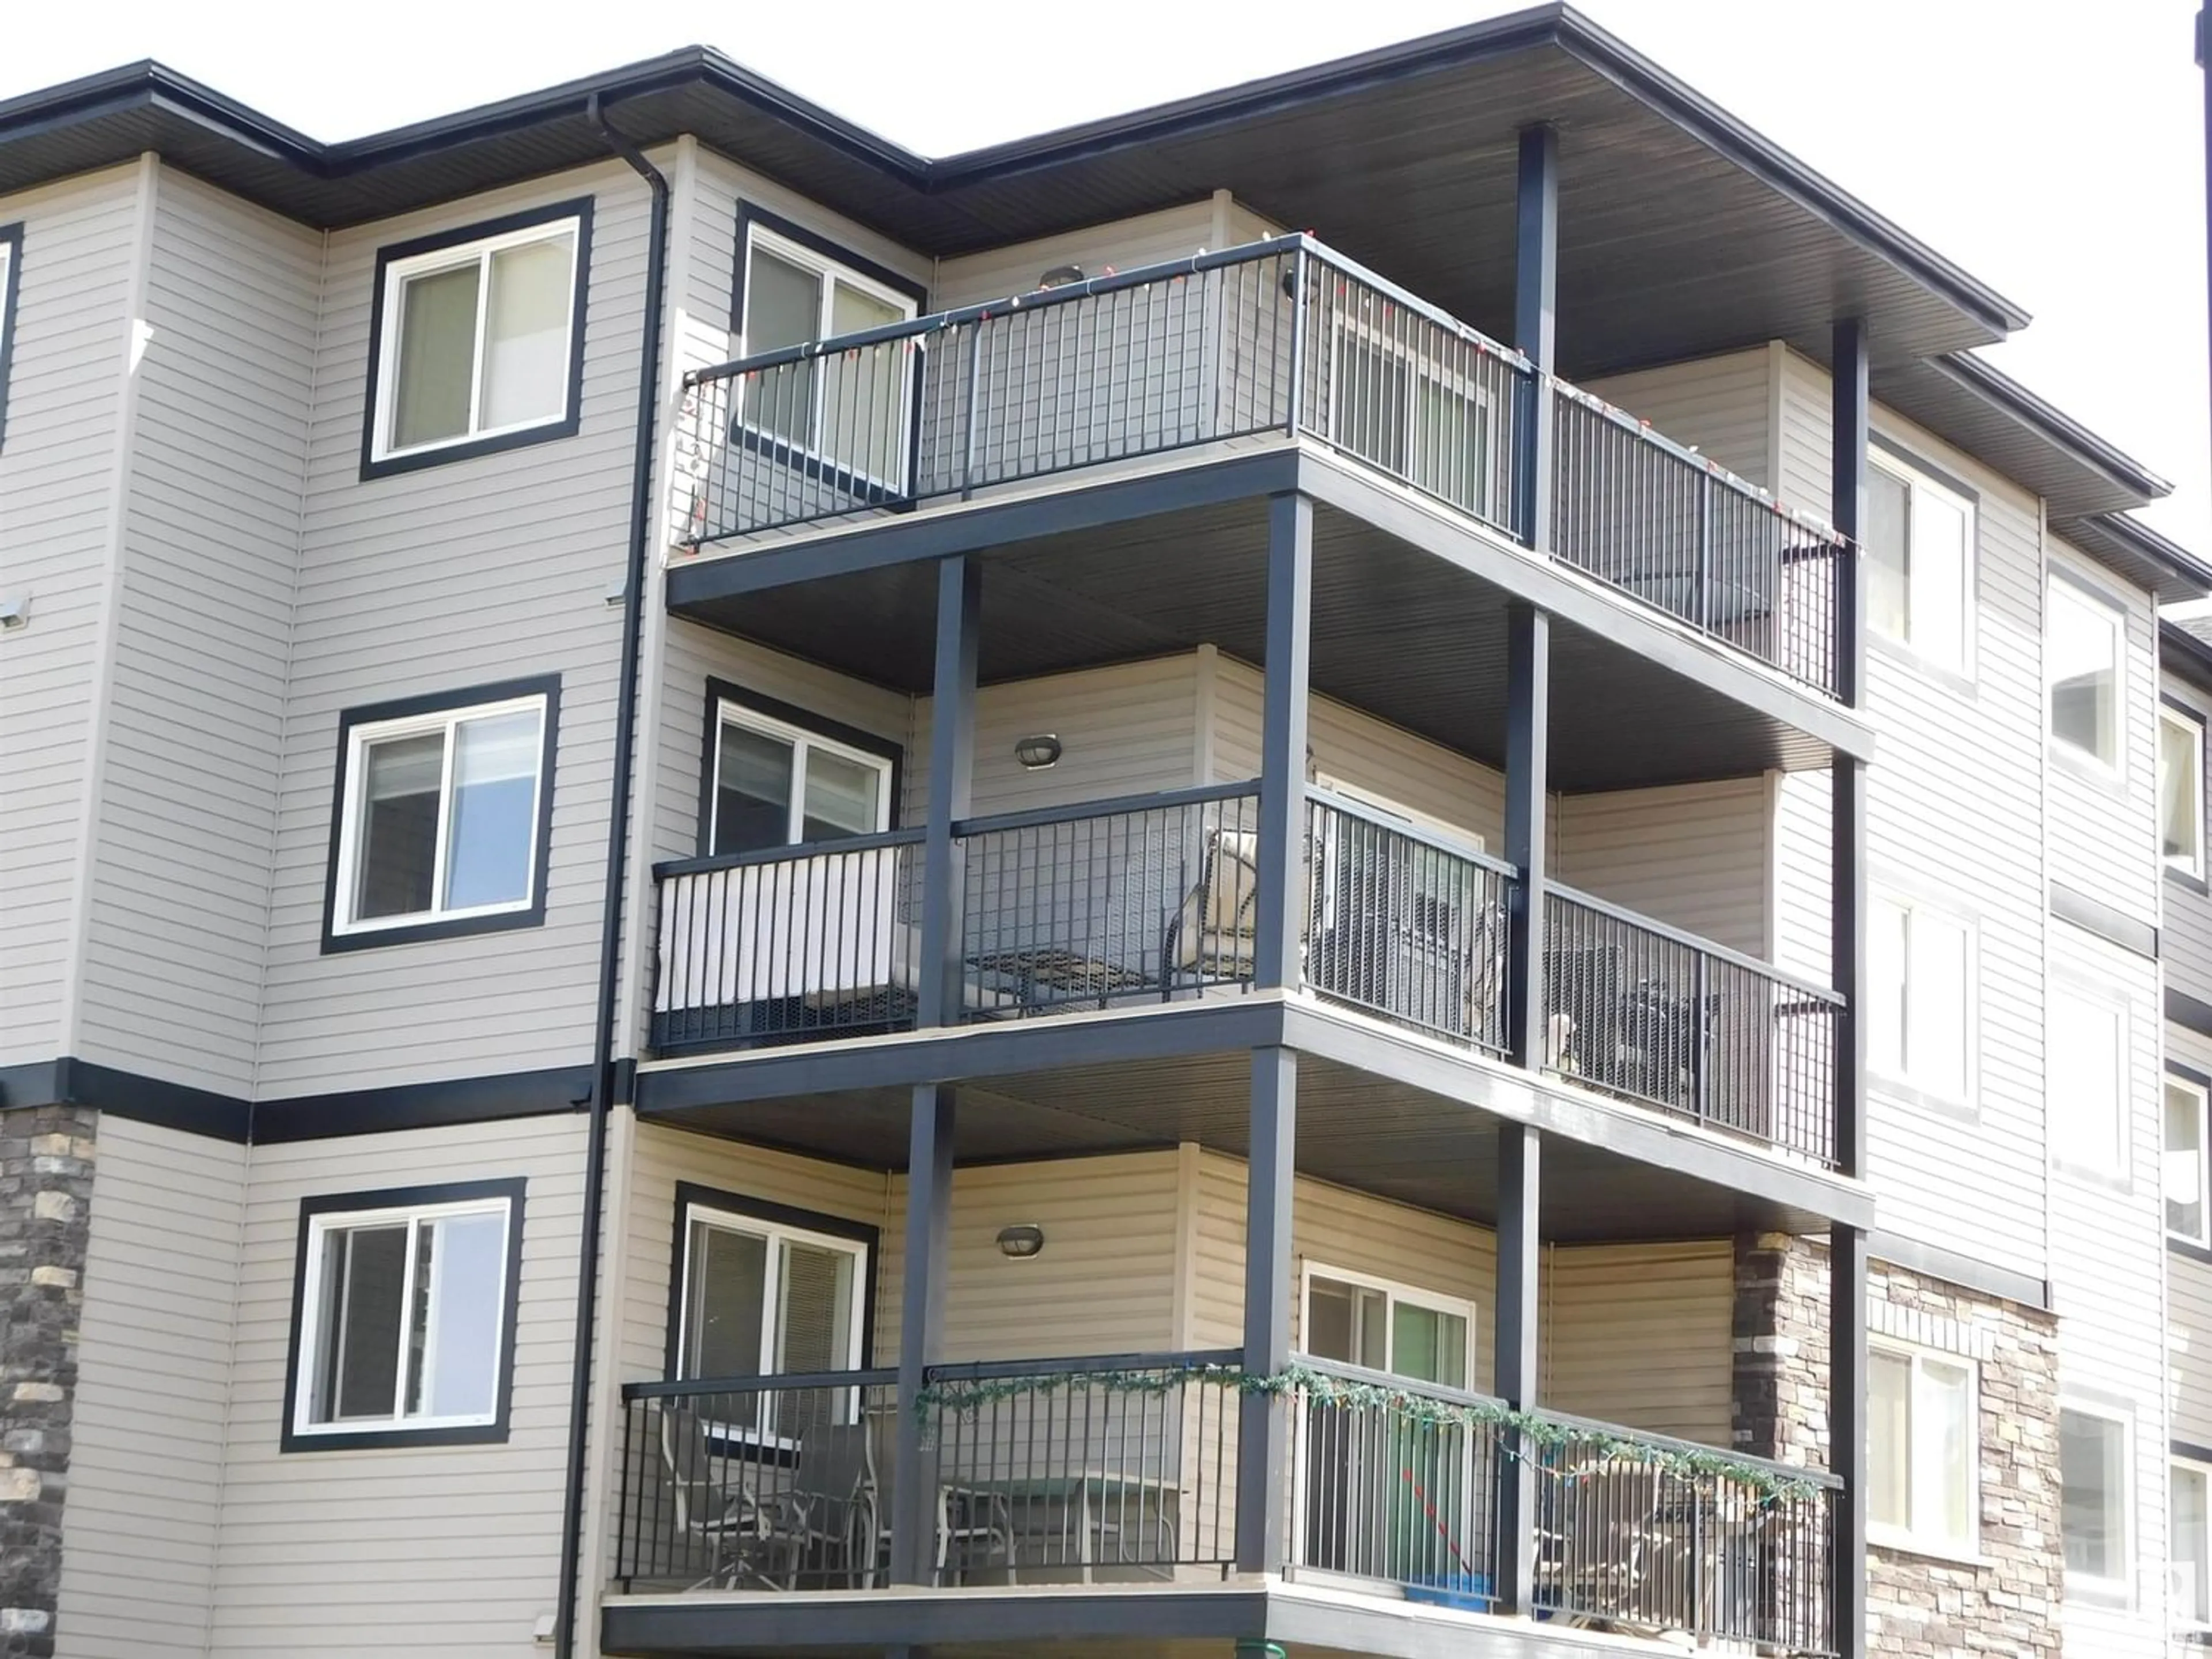 A pic from exterior of the house or condo for #302 5951 165 AV NW, Edmonton Alberta T5Y0J6